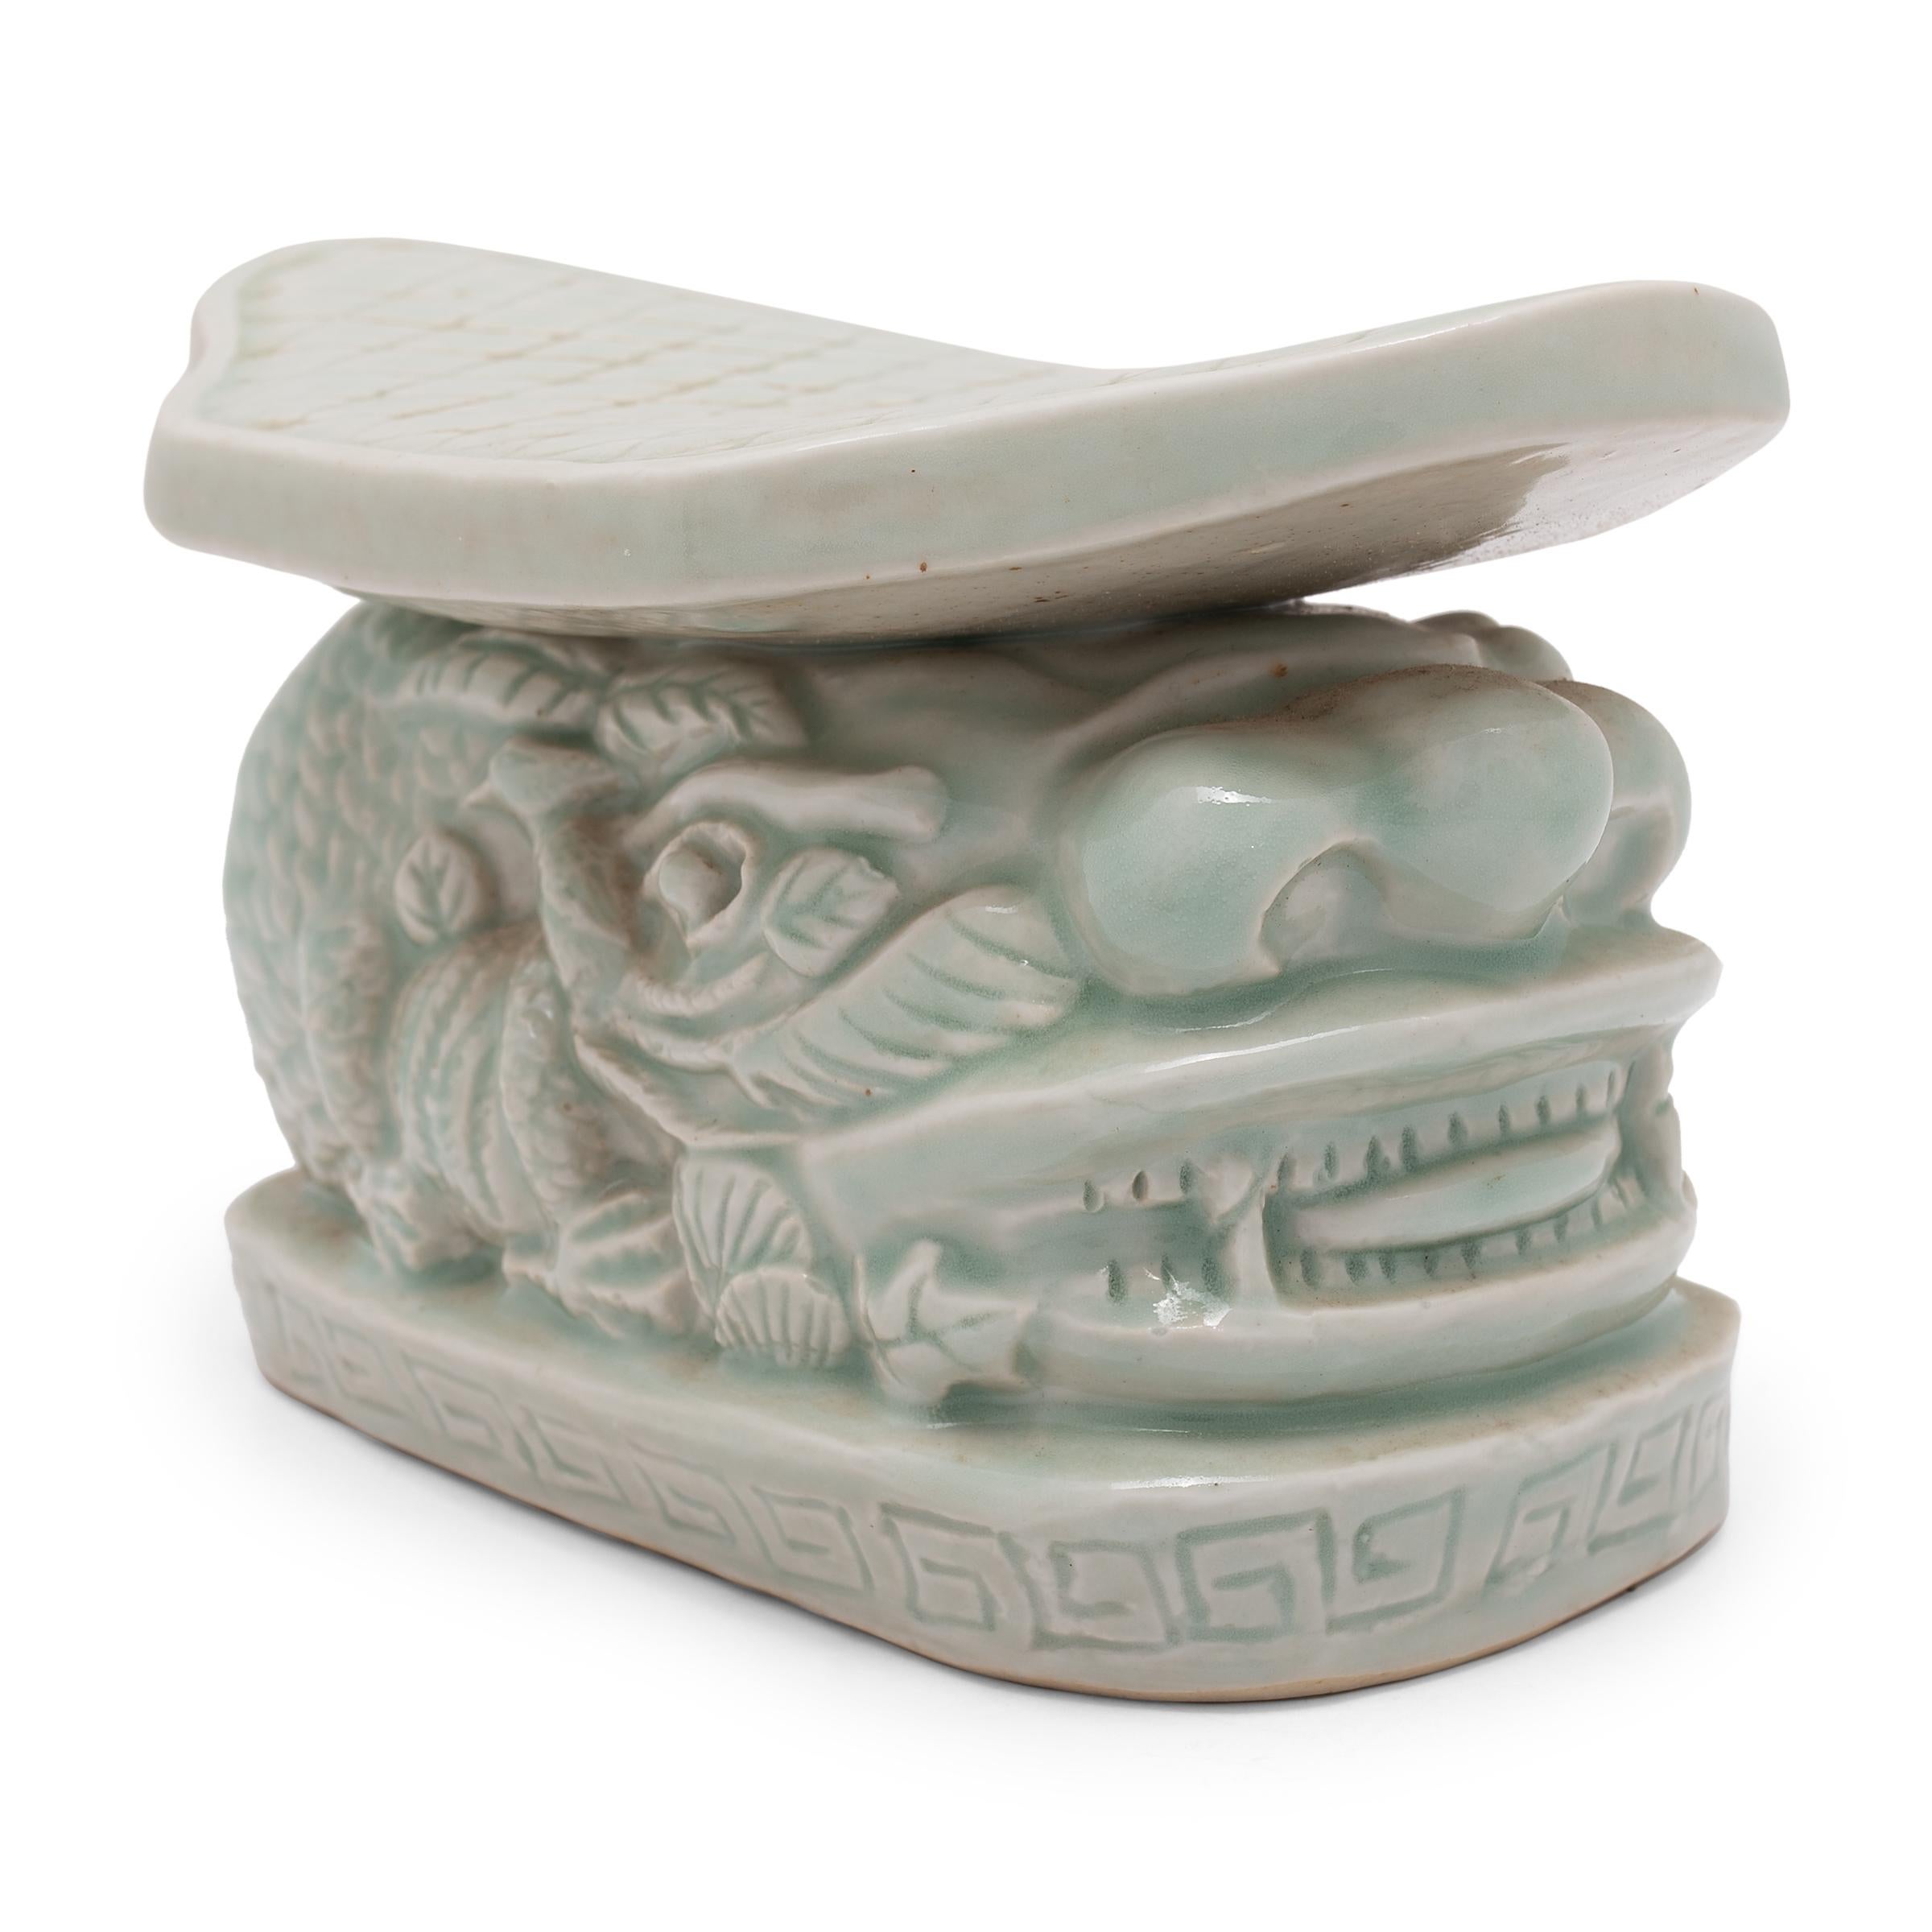 To keep their elaborate hairstyles intact while sleeping, well-to-do Qing-dynasty women used elevated headrests such as this in lieu of a pillow. This porcelain headrest dates to the early 20th century and was likely used for decorative, rather than